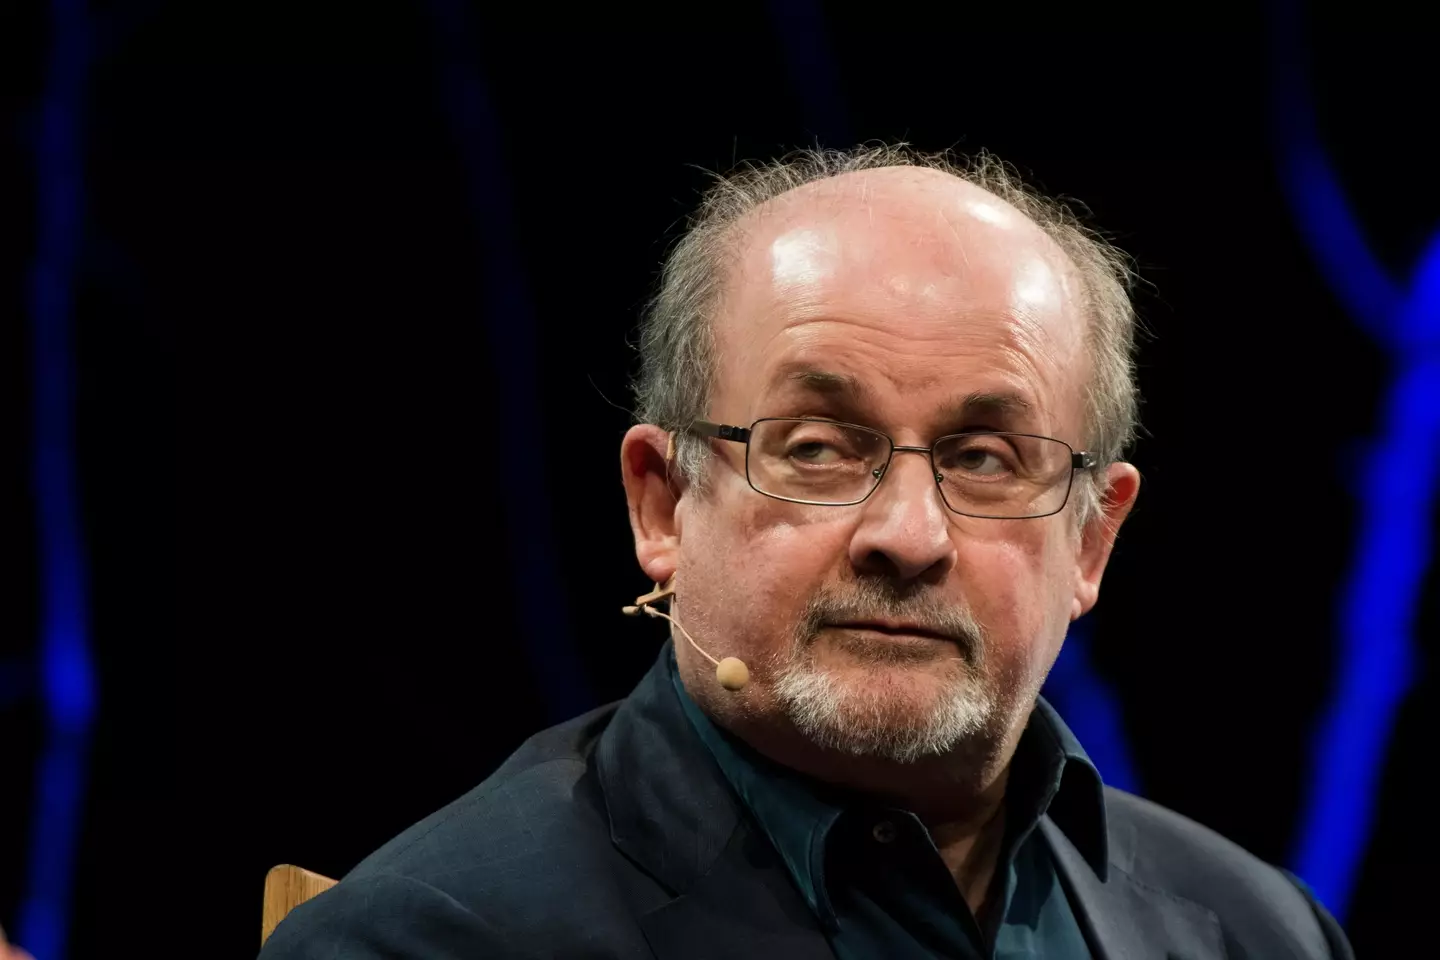 Rushdie is the author of the controversial book, The Satanic Verses.